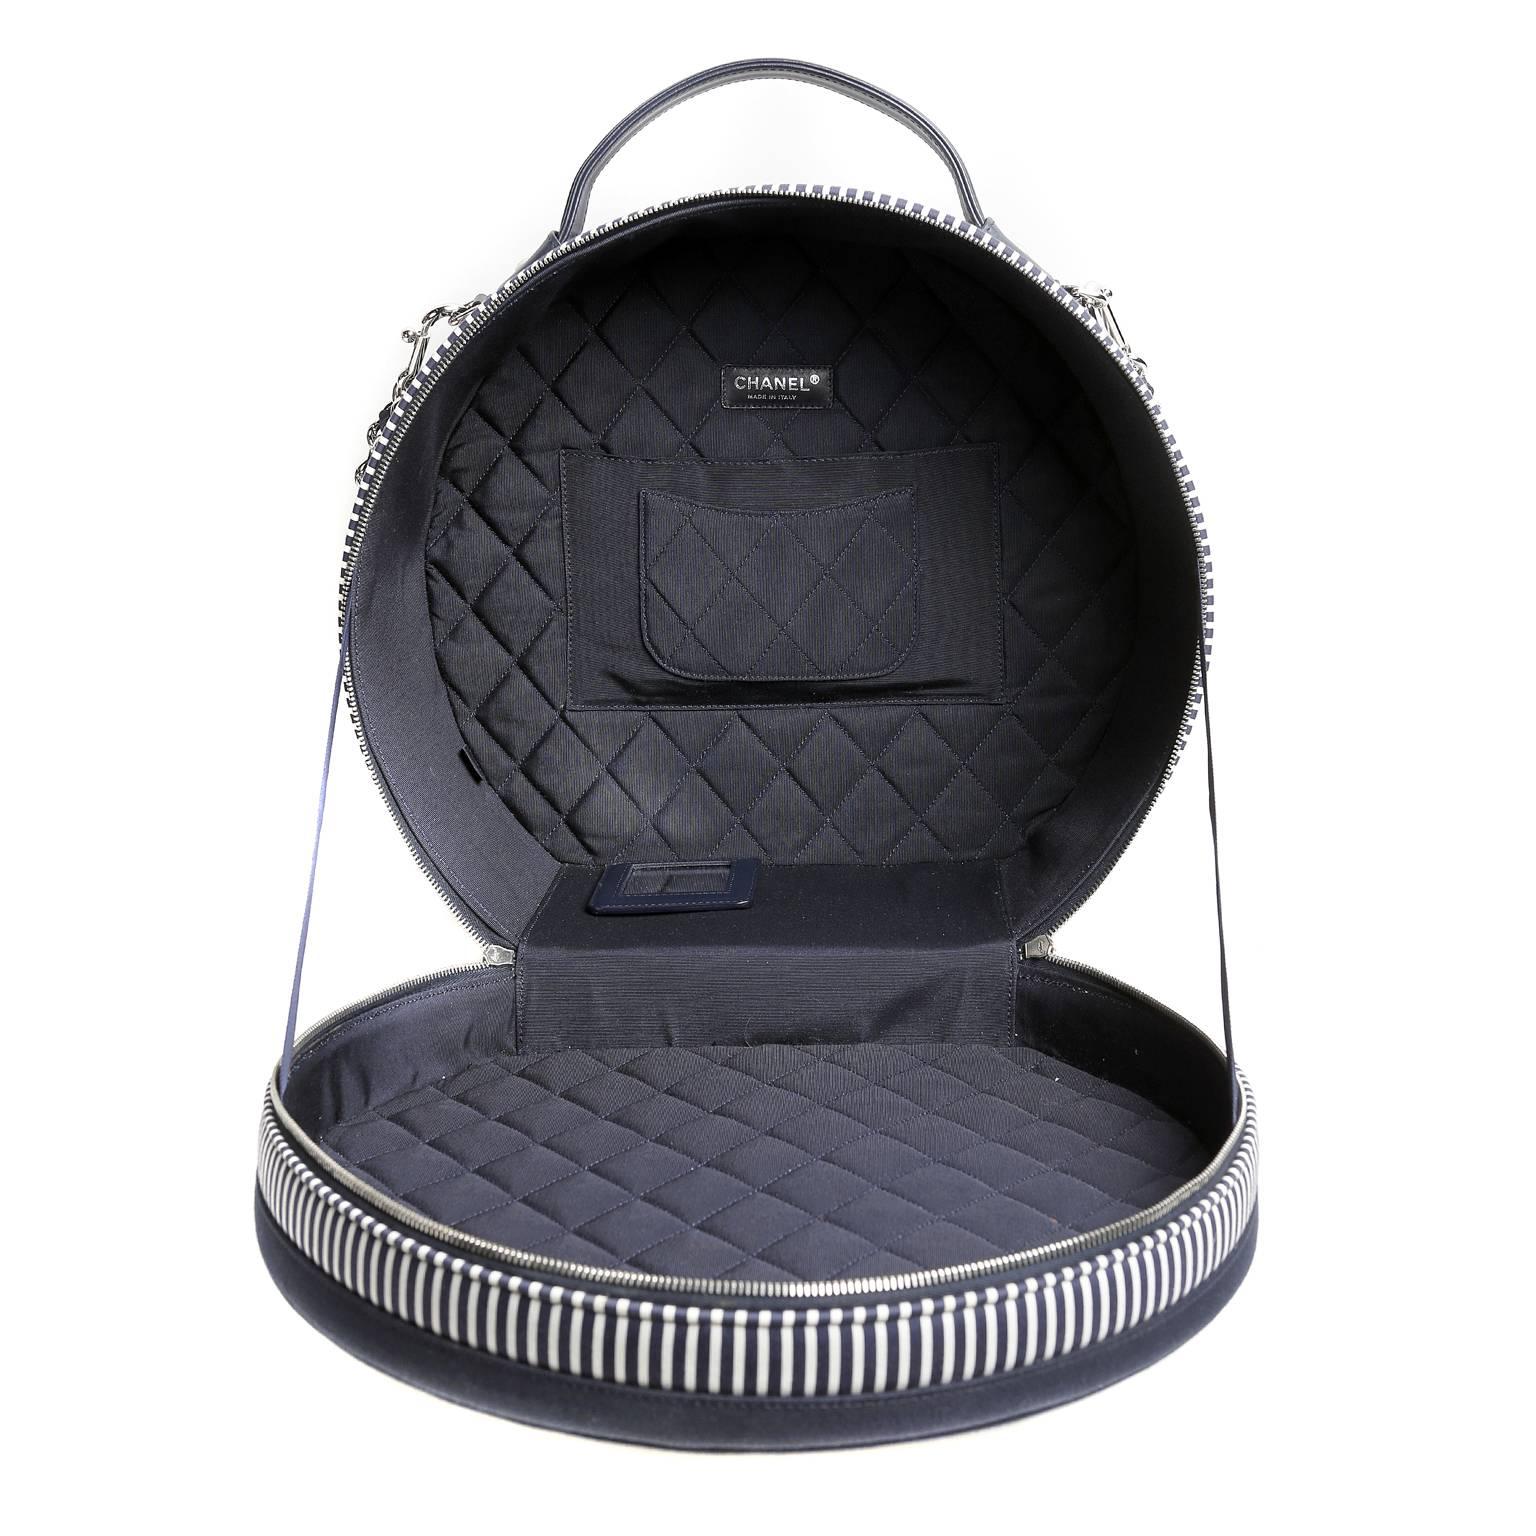 Black Chanel Navy Striped Hat Box Tote- Cruise 2010 Collection